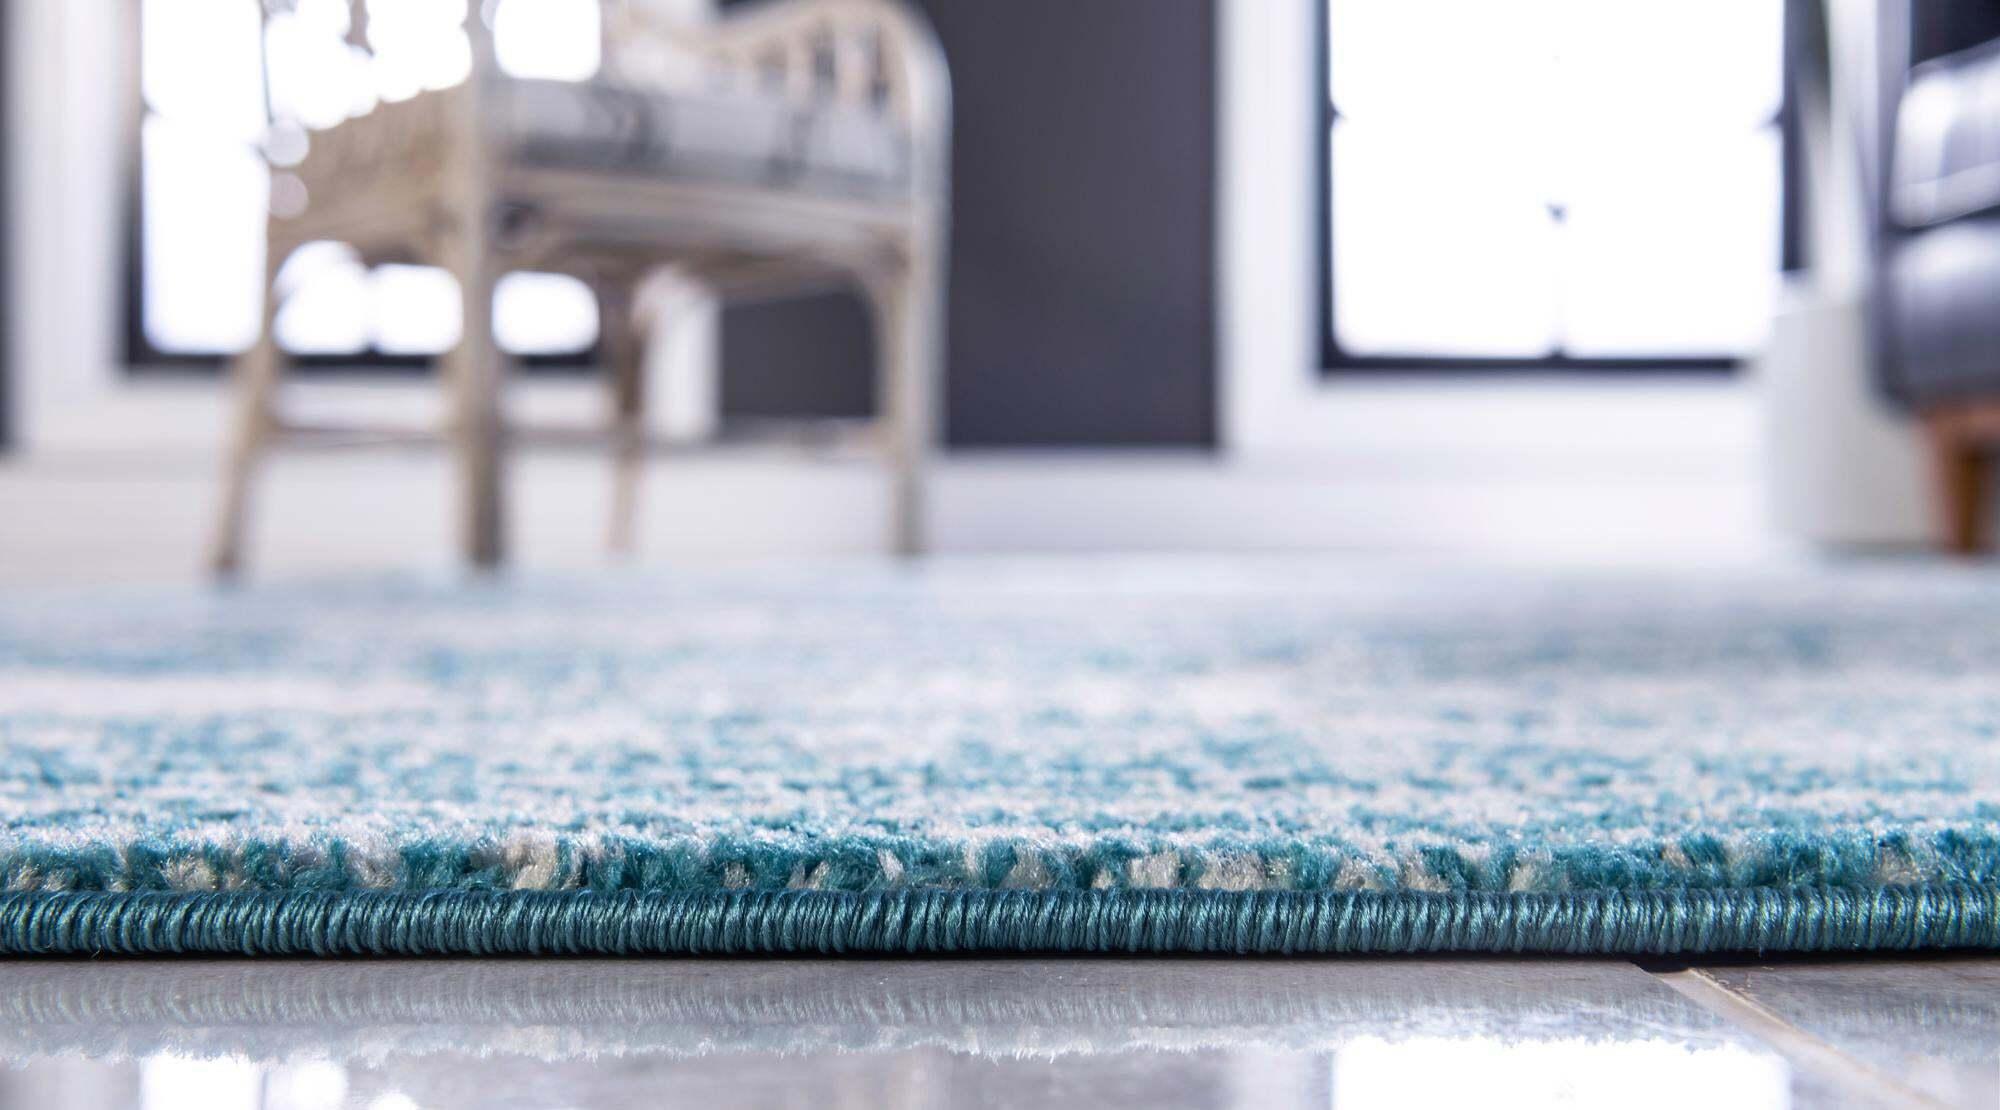 Unique Loom Indoor Rugs - Bromley Border Rectangular 8x11 Rug Turquoise & Ivory